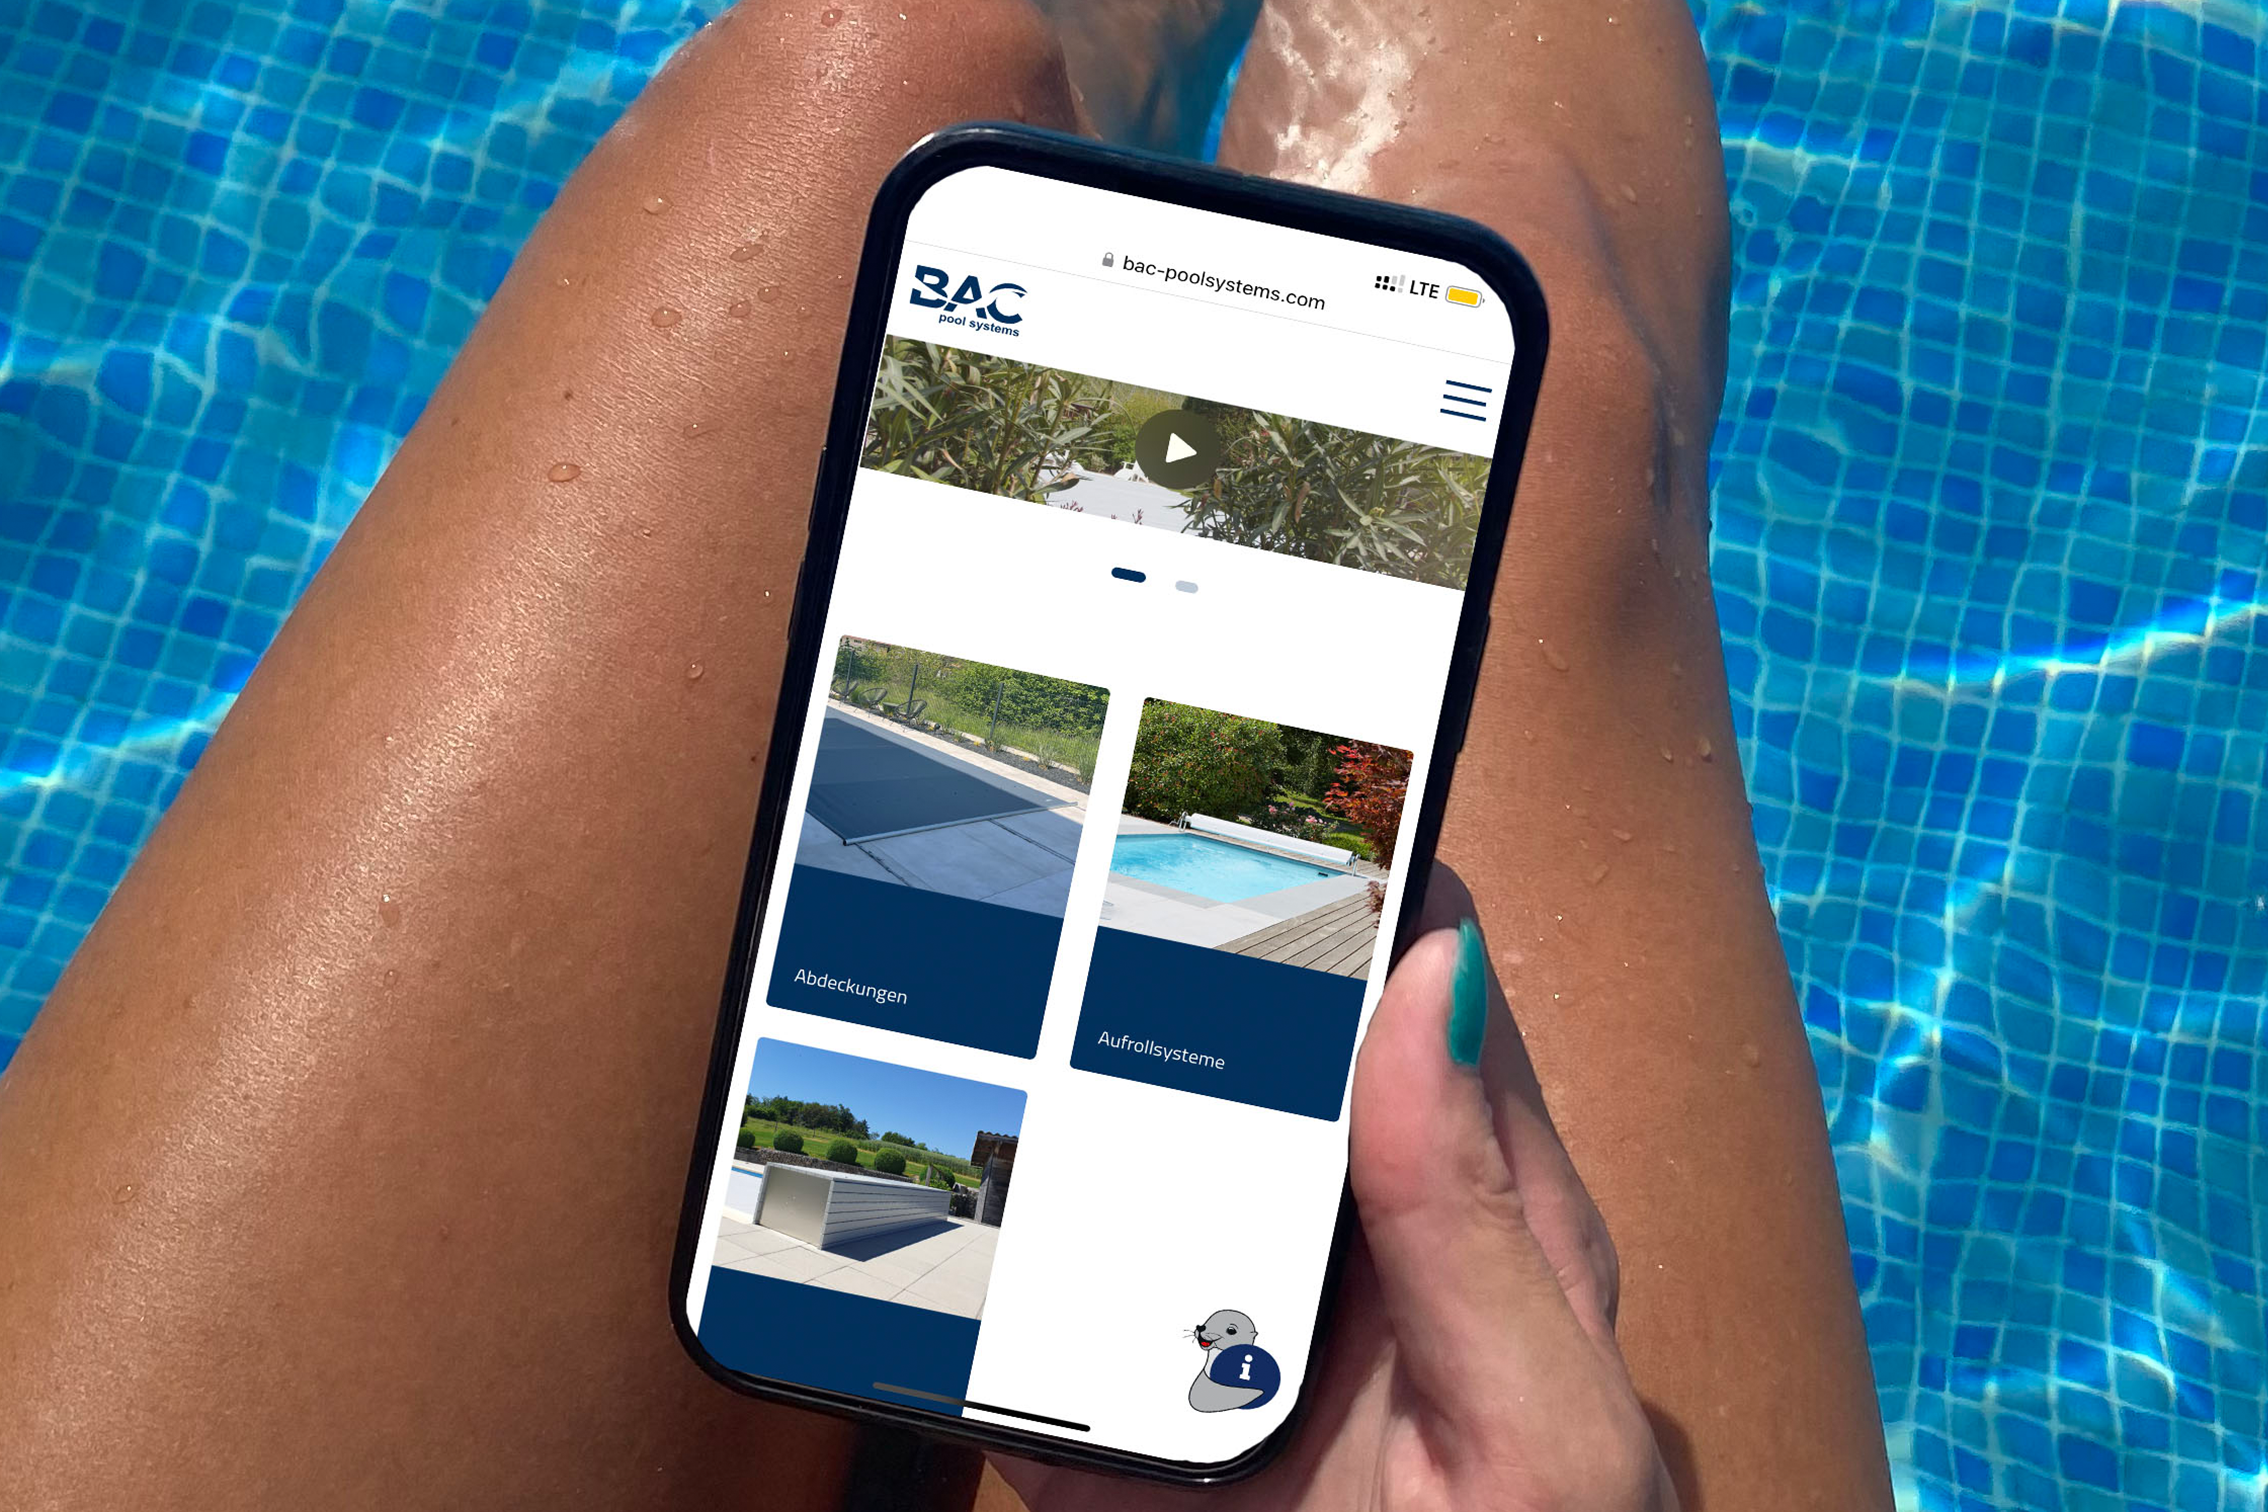 BAC pool systems nouvelle page d'accueil